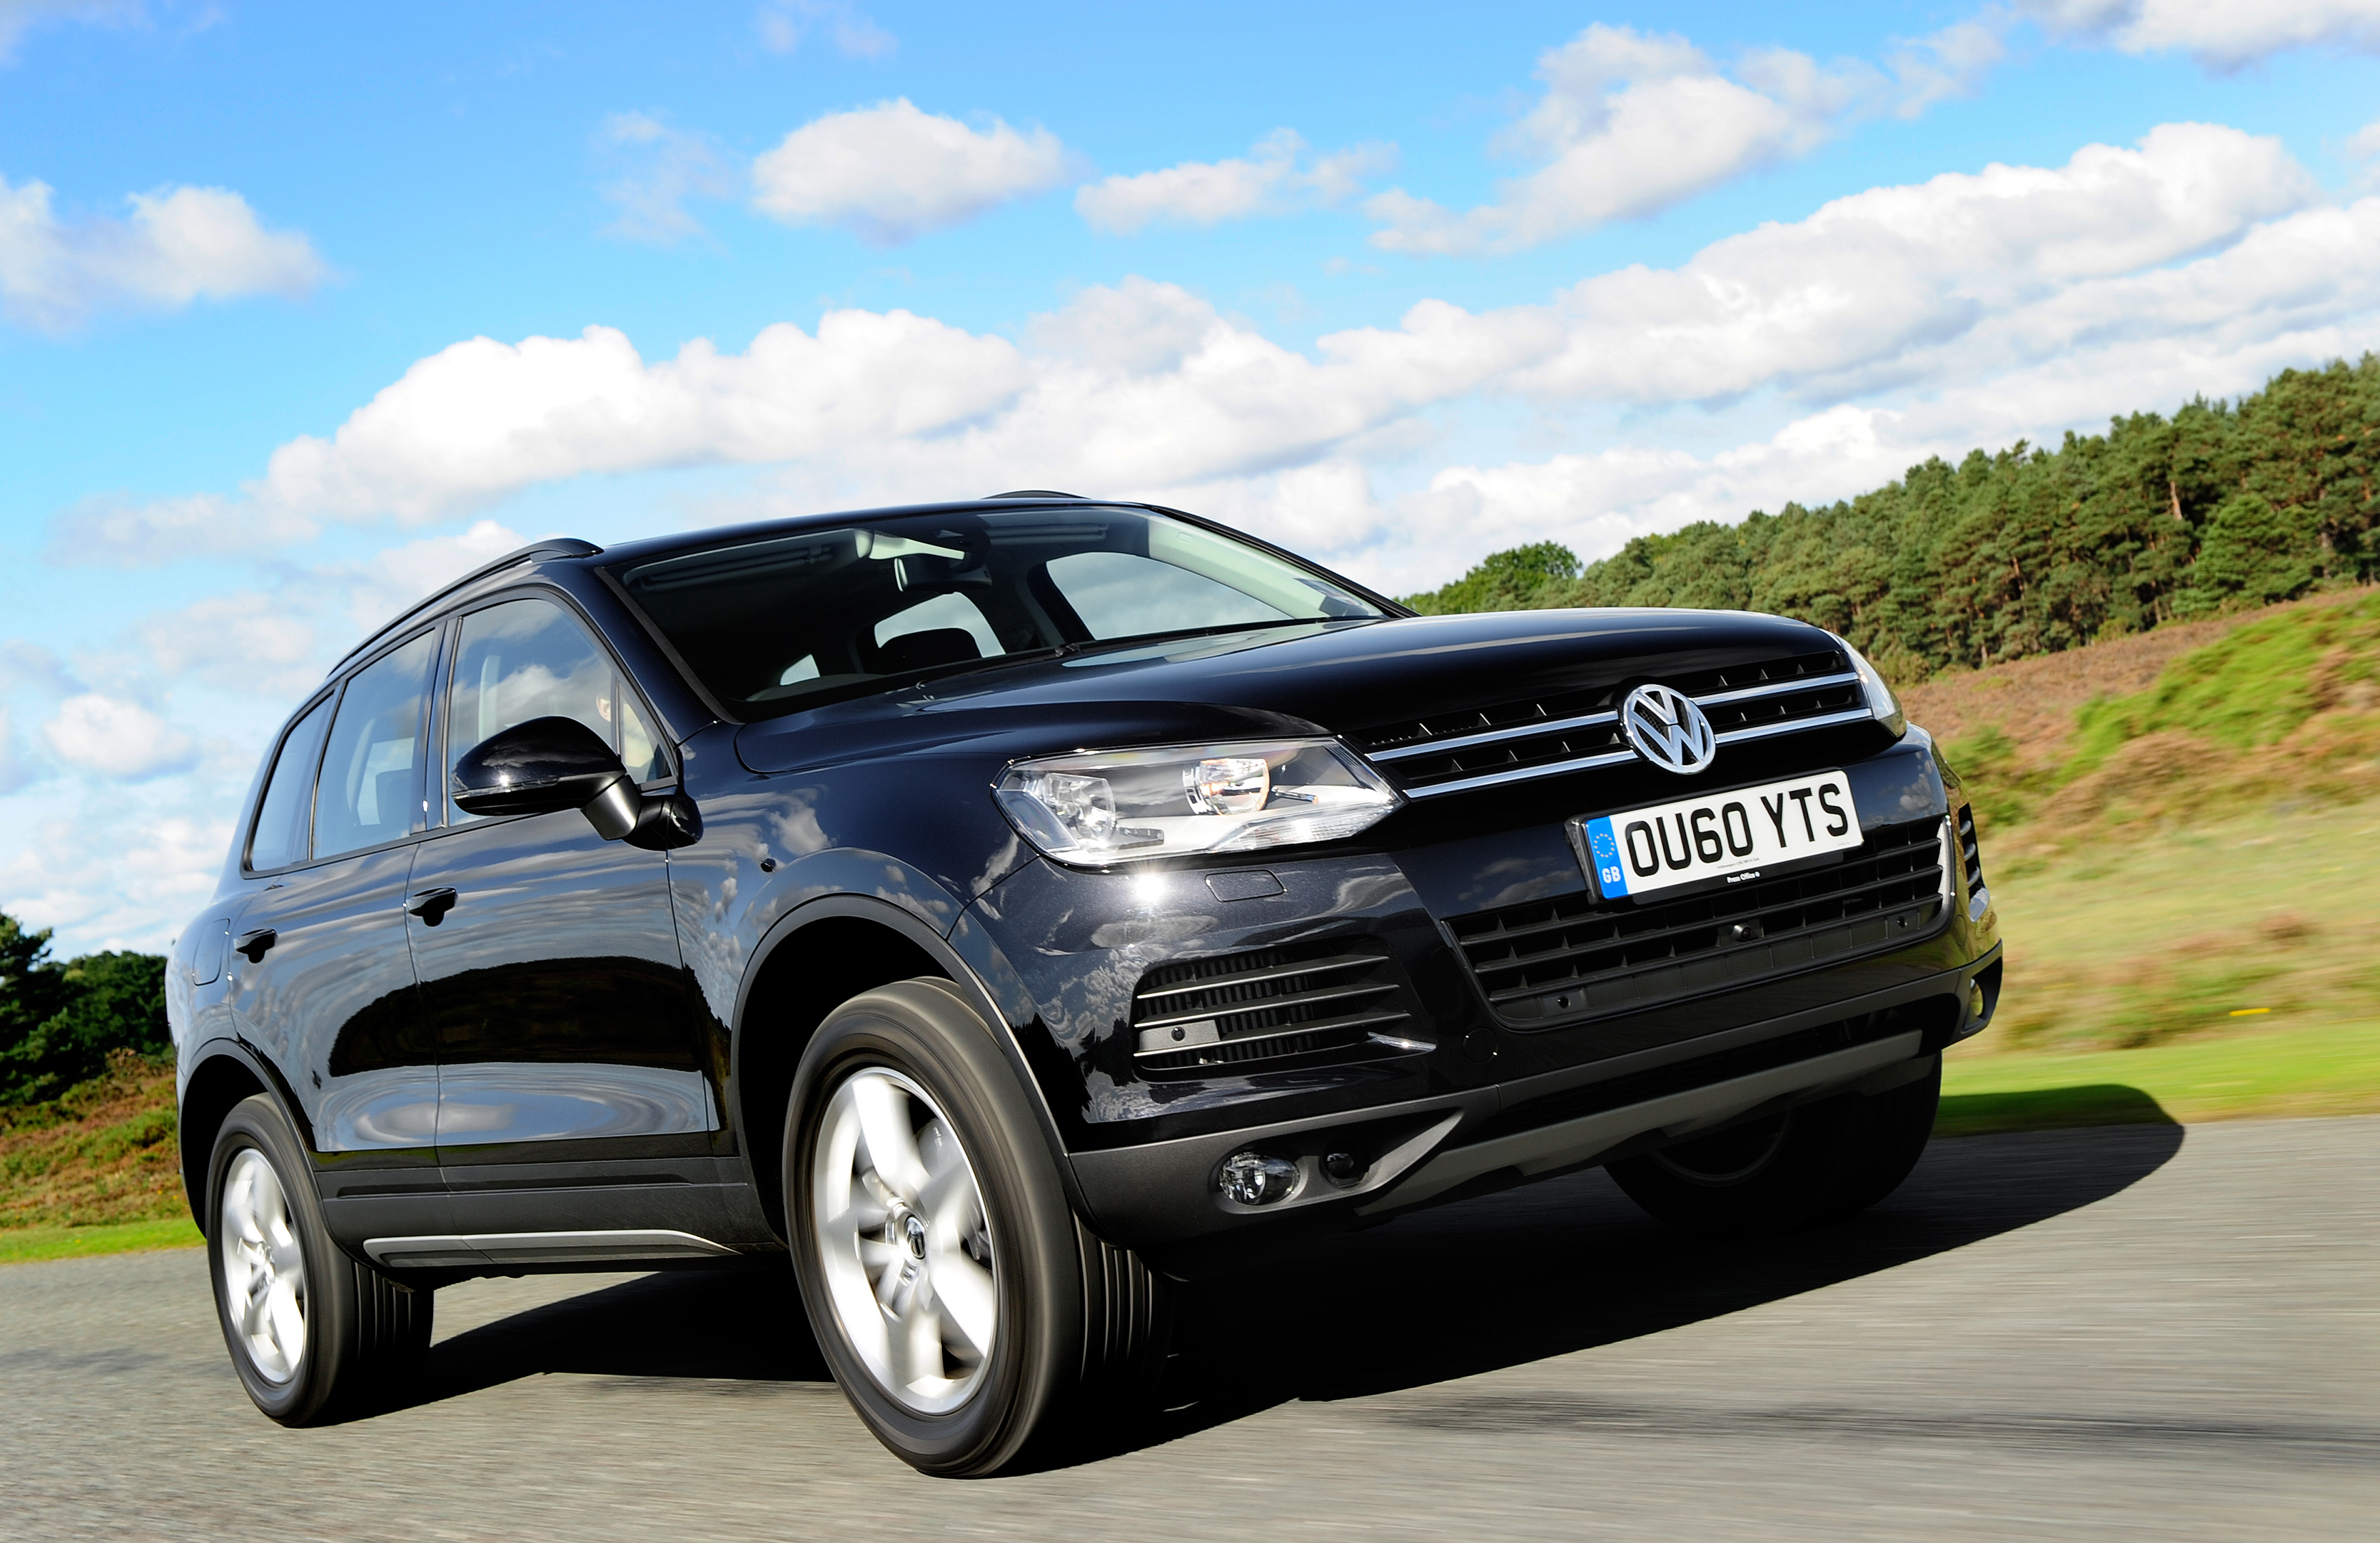 The Touareg is a high-end luxury SUV